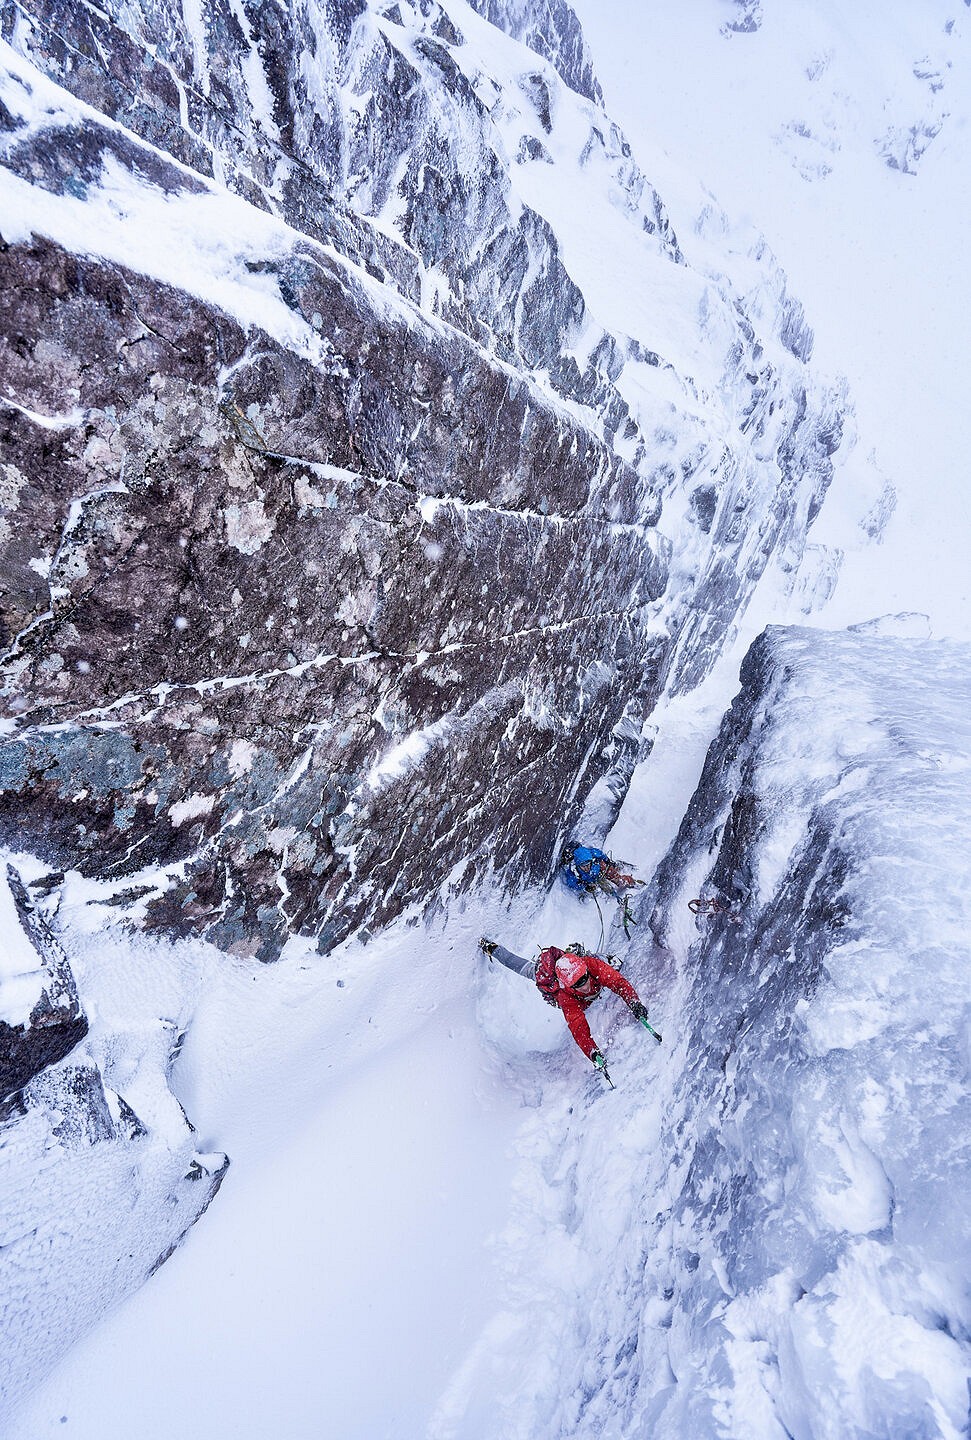 Tom Phillips bridging as high as possible up the second pitch of Minus One Gully, before committing to the steep crux ice wall.  © Hamish Frost